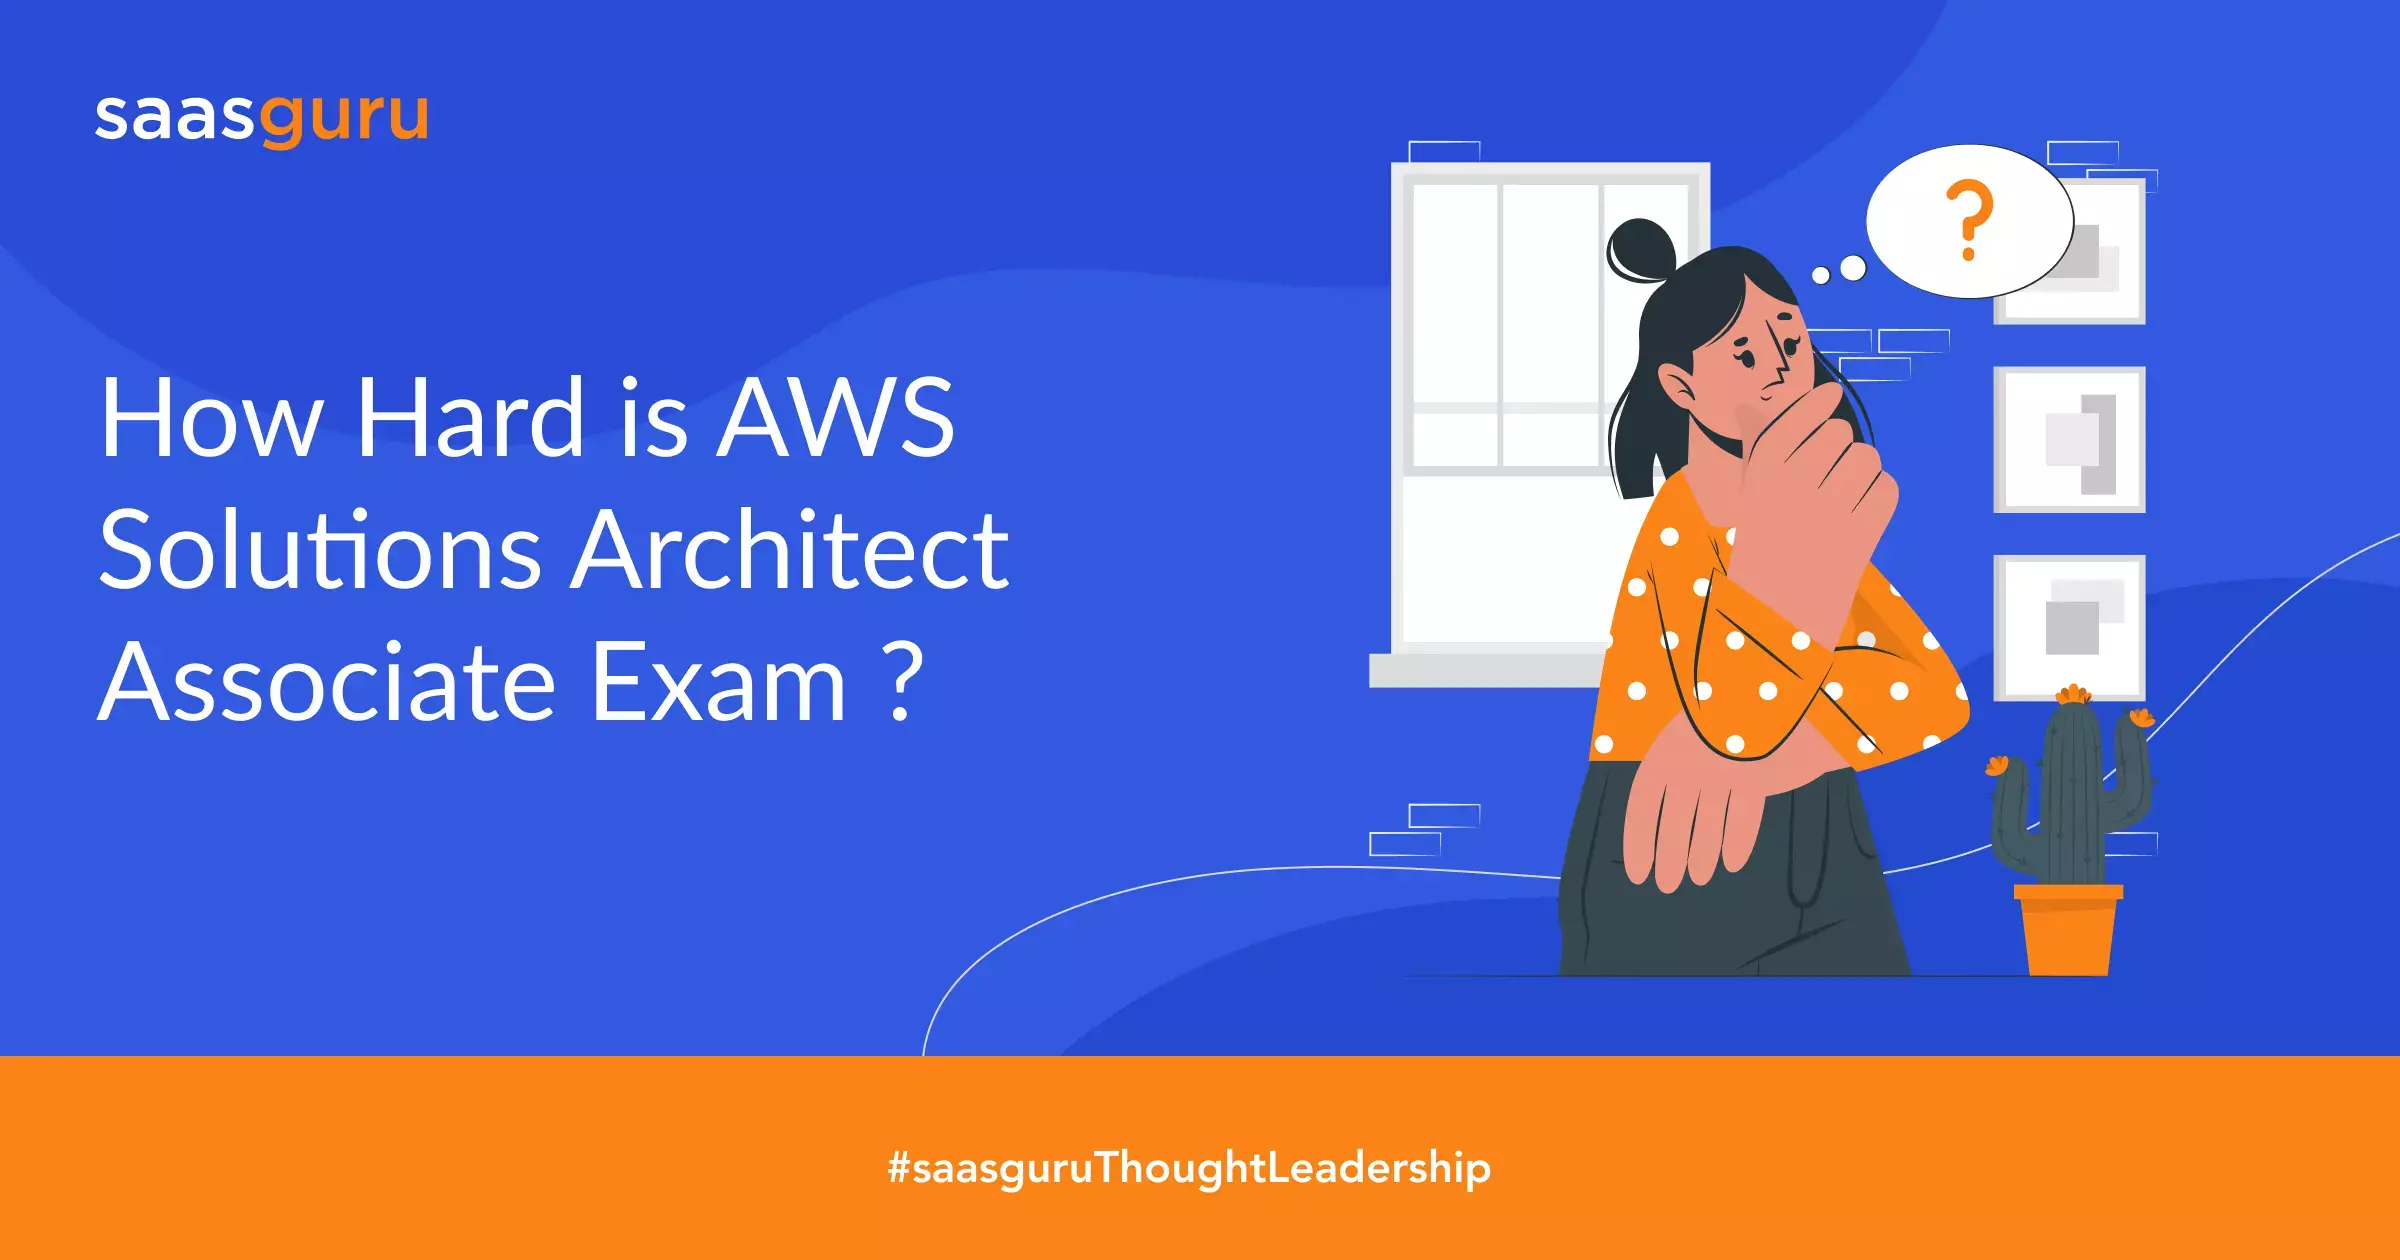 How Hard is AWS Solutions Architect Associate Exam?